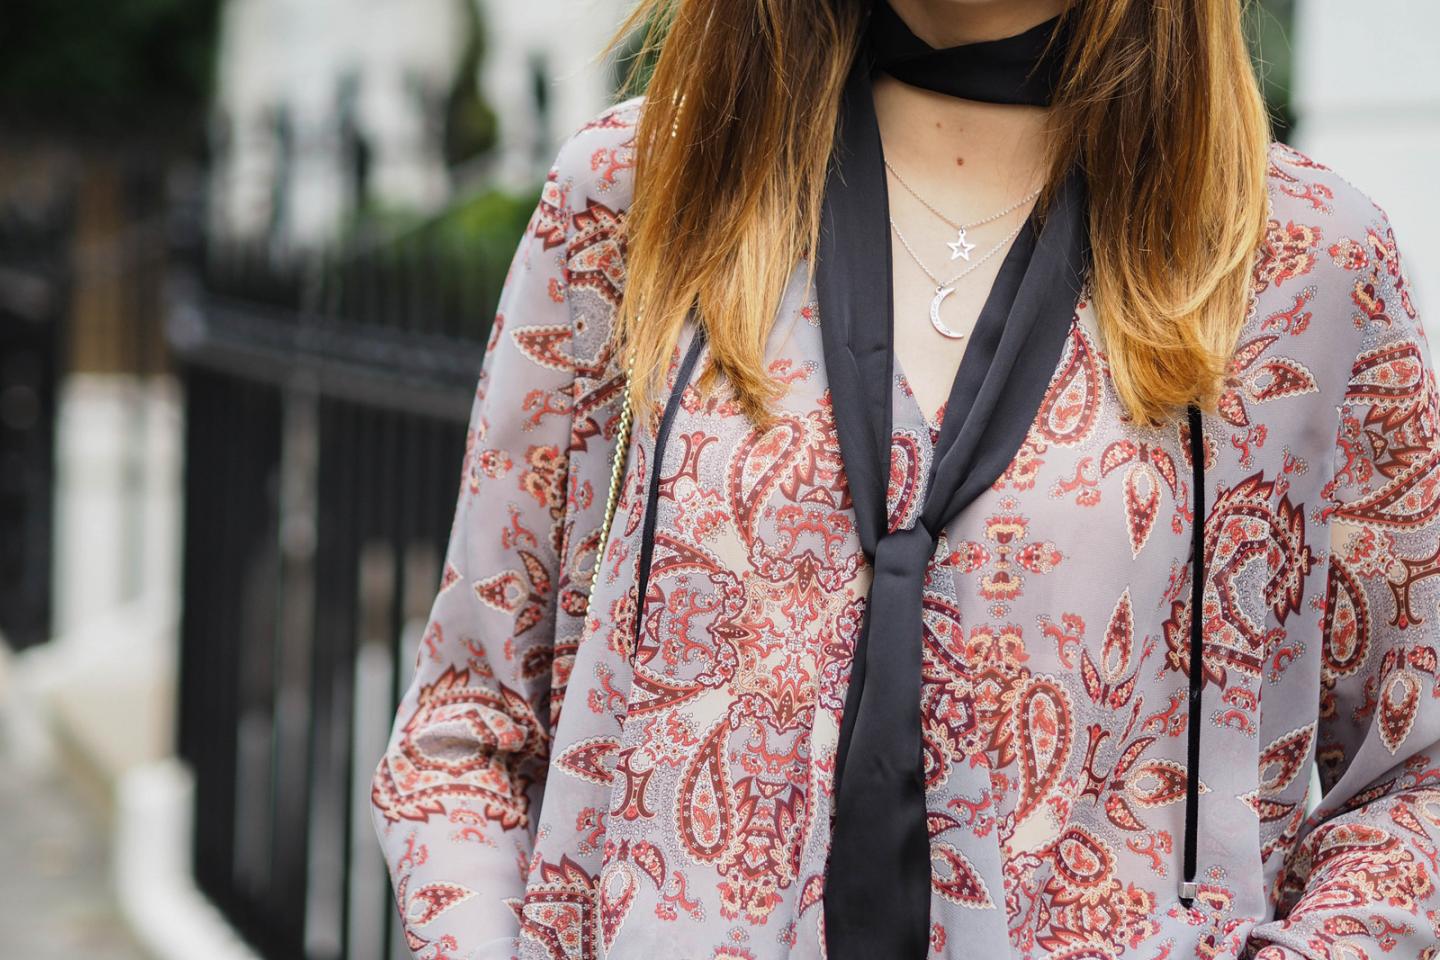 EJSTYLE wears paisley print top, skinny fringe scarf, 70s outfit details